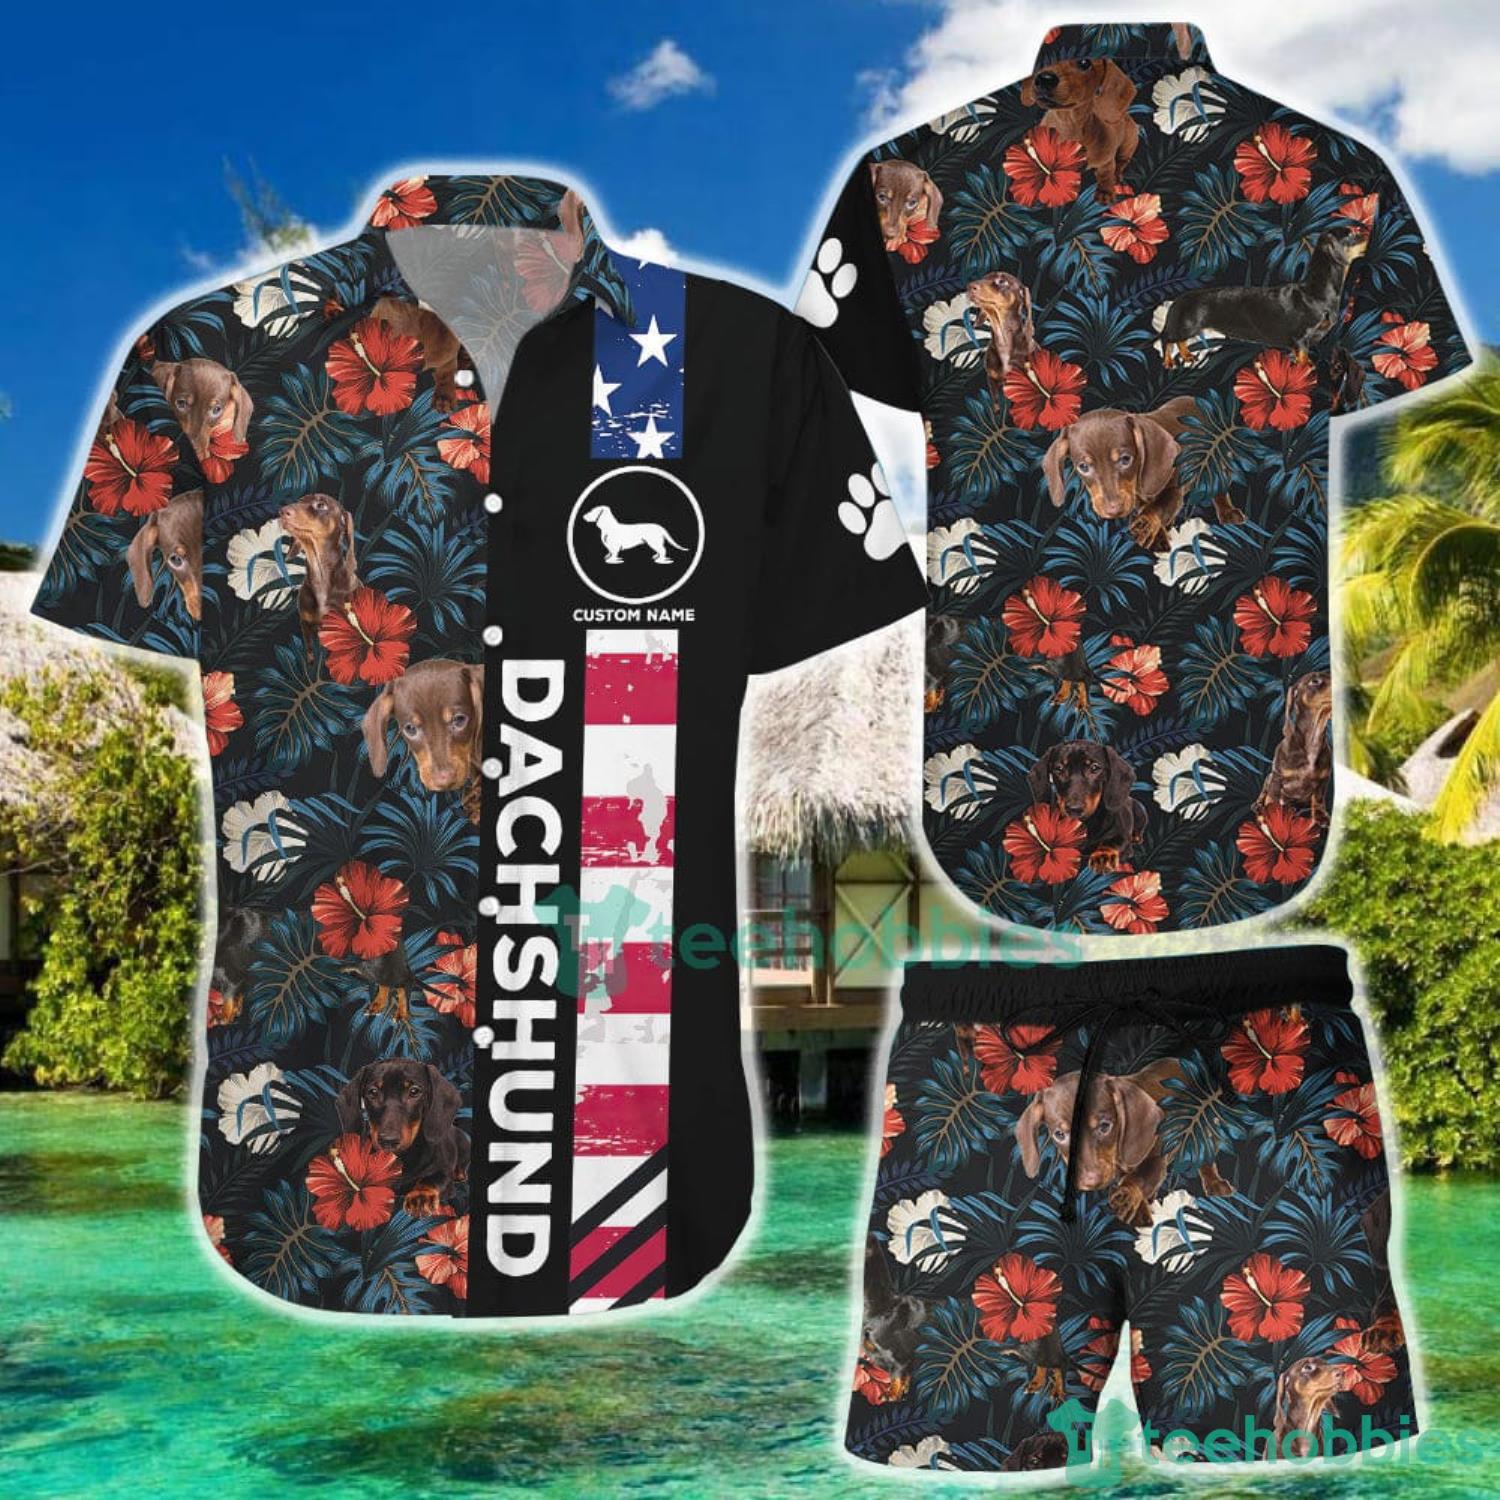 https://image.teehobbies.us/2023/02/dachshund-personalized-name-american-cute-dog-with-flag-and-tropical-flowers-hawaiian-shirt-and-short-best-gift-for-summer.jpg